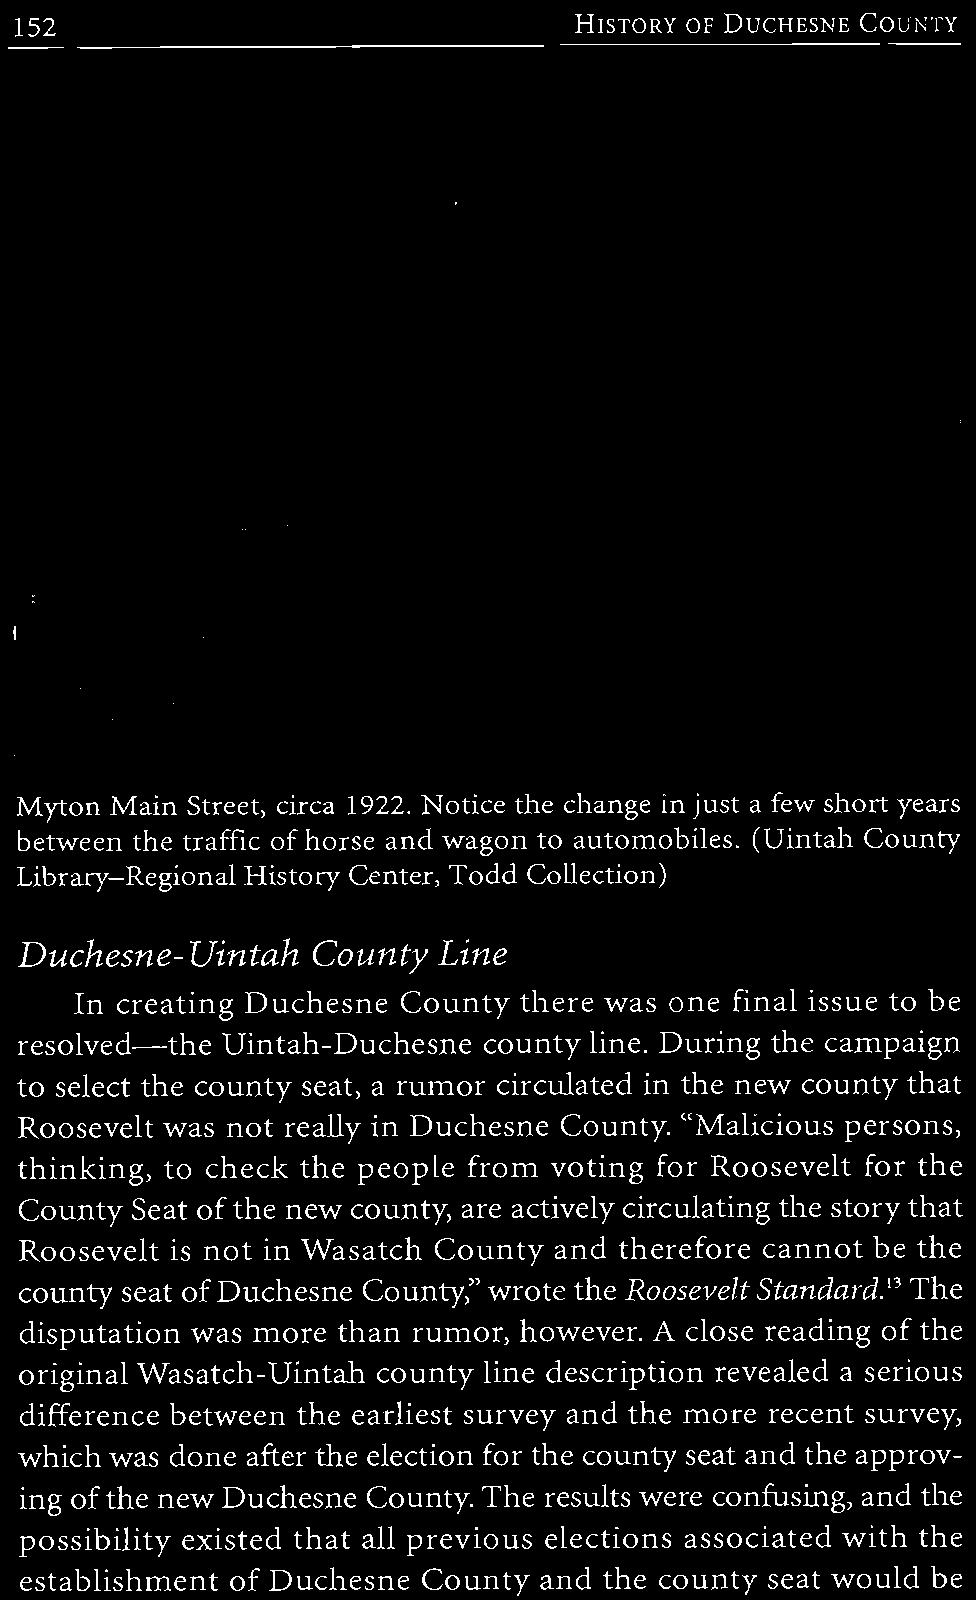 During the campaign to select the county seat, a rumor circulated in the new county that Roosevelt was not really in Duchesne County.